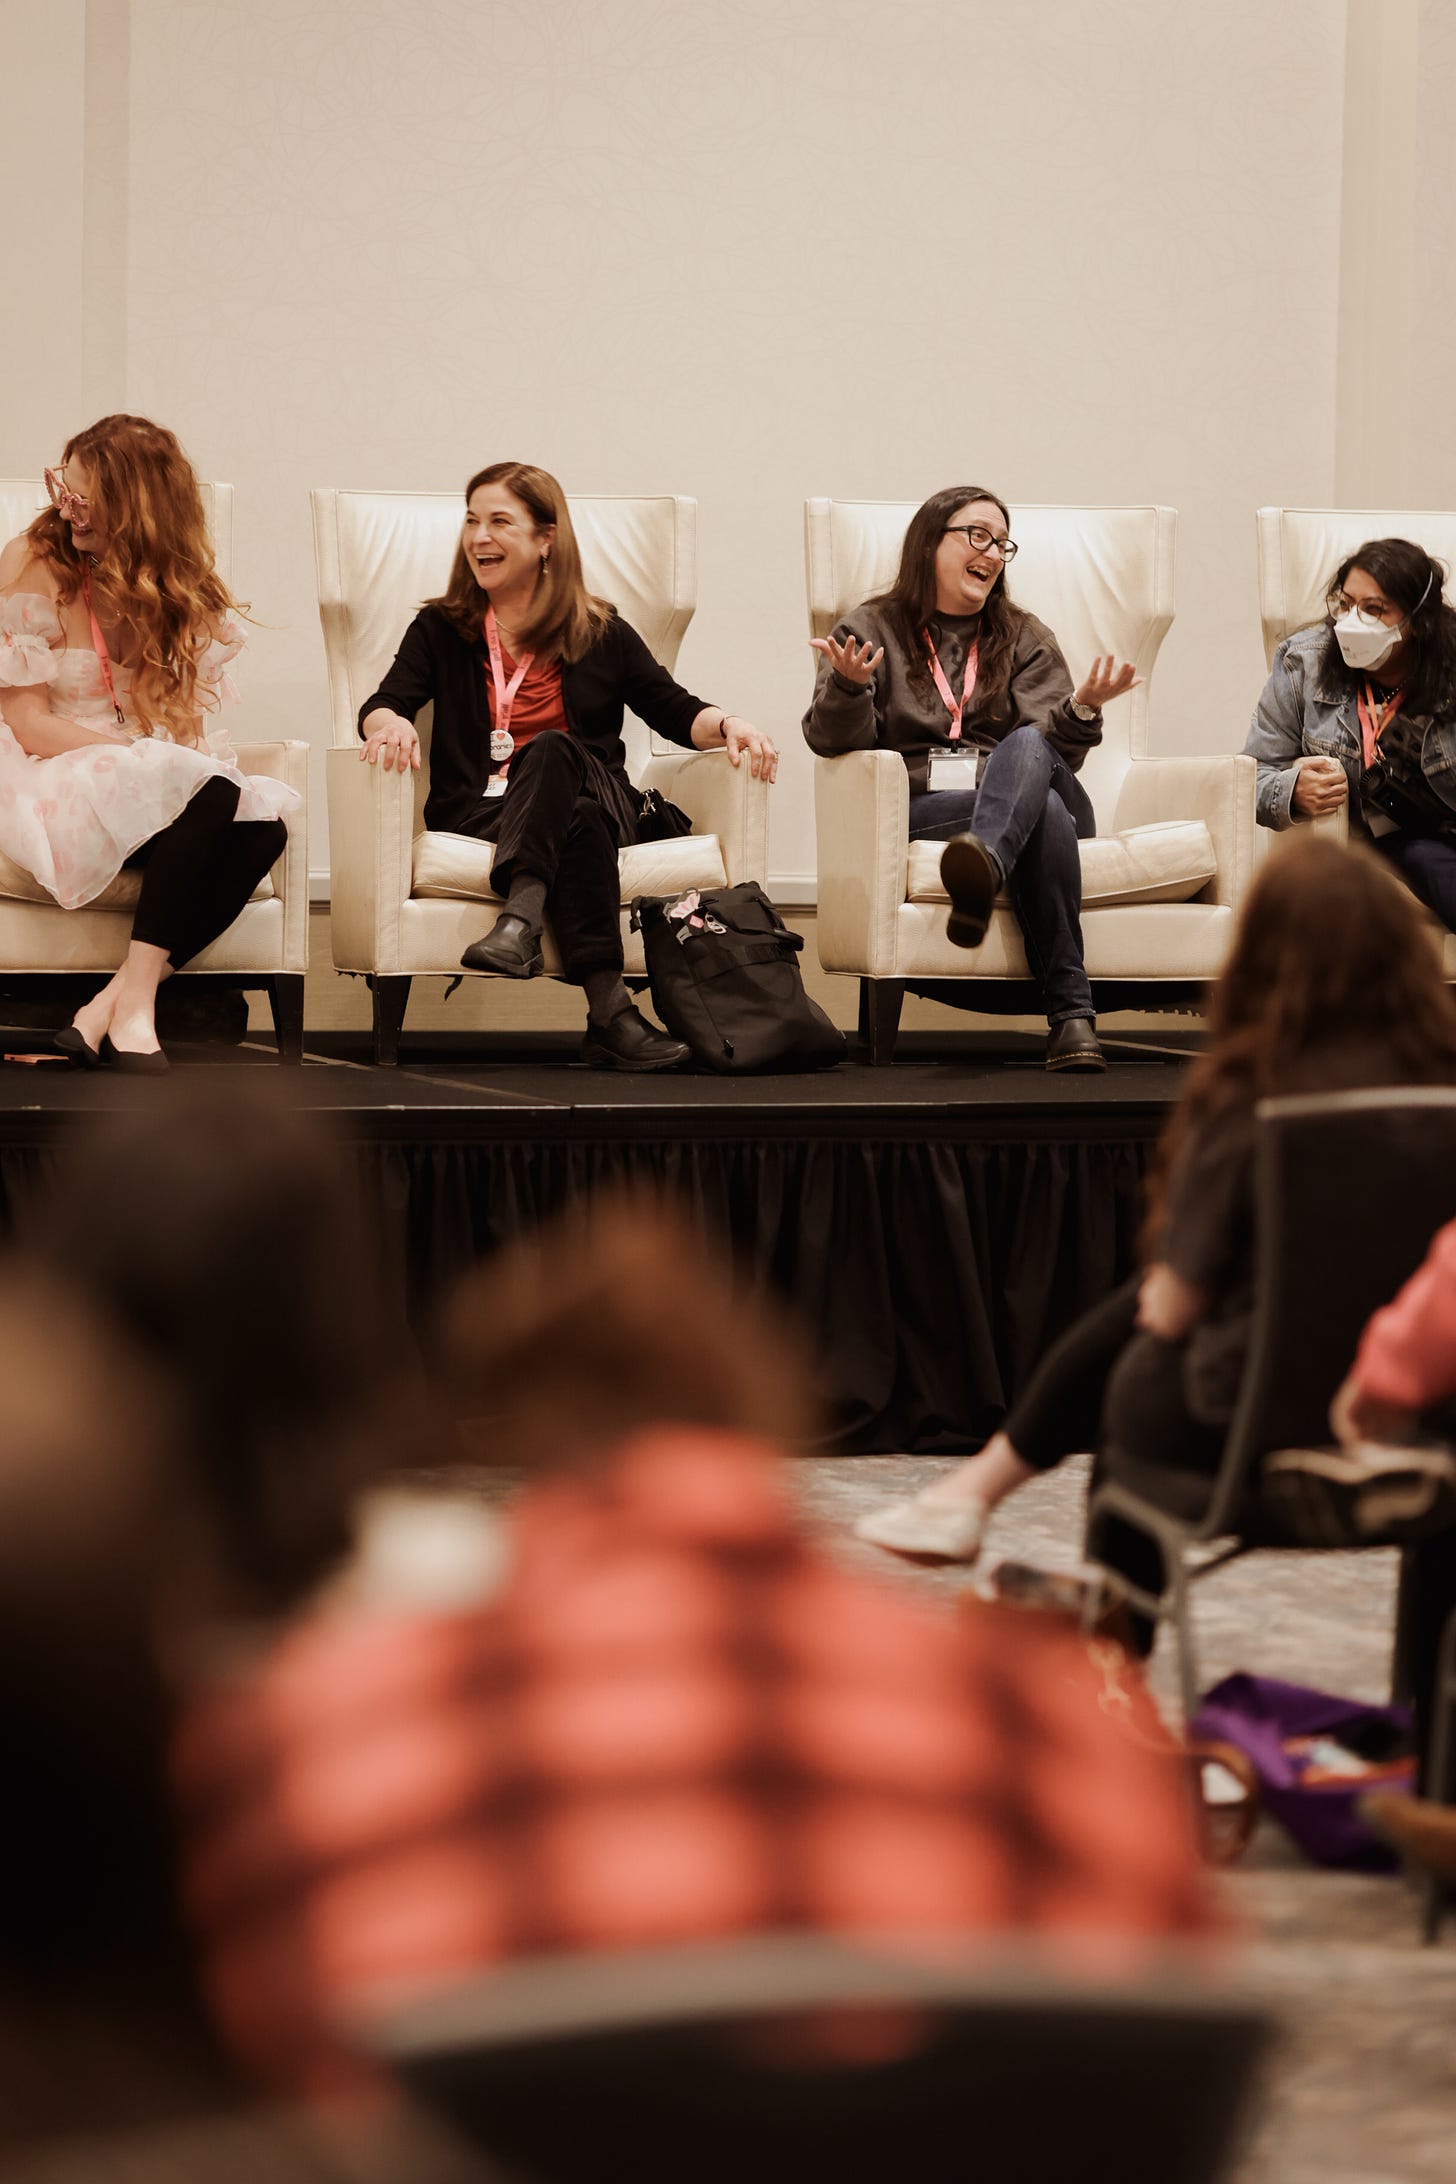 Photo of Serena Kaylor, Ginny Baird, me, and Preeti Chhibber, where I am holding up my hands and laughing in a deranged matter.